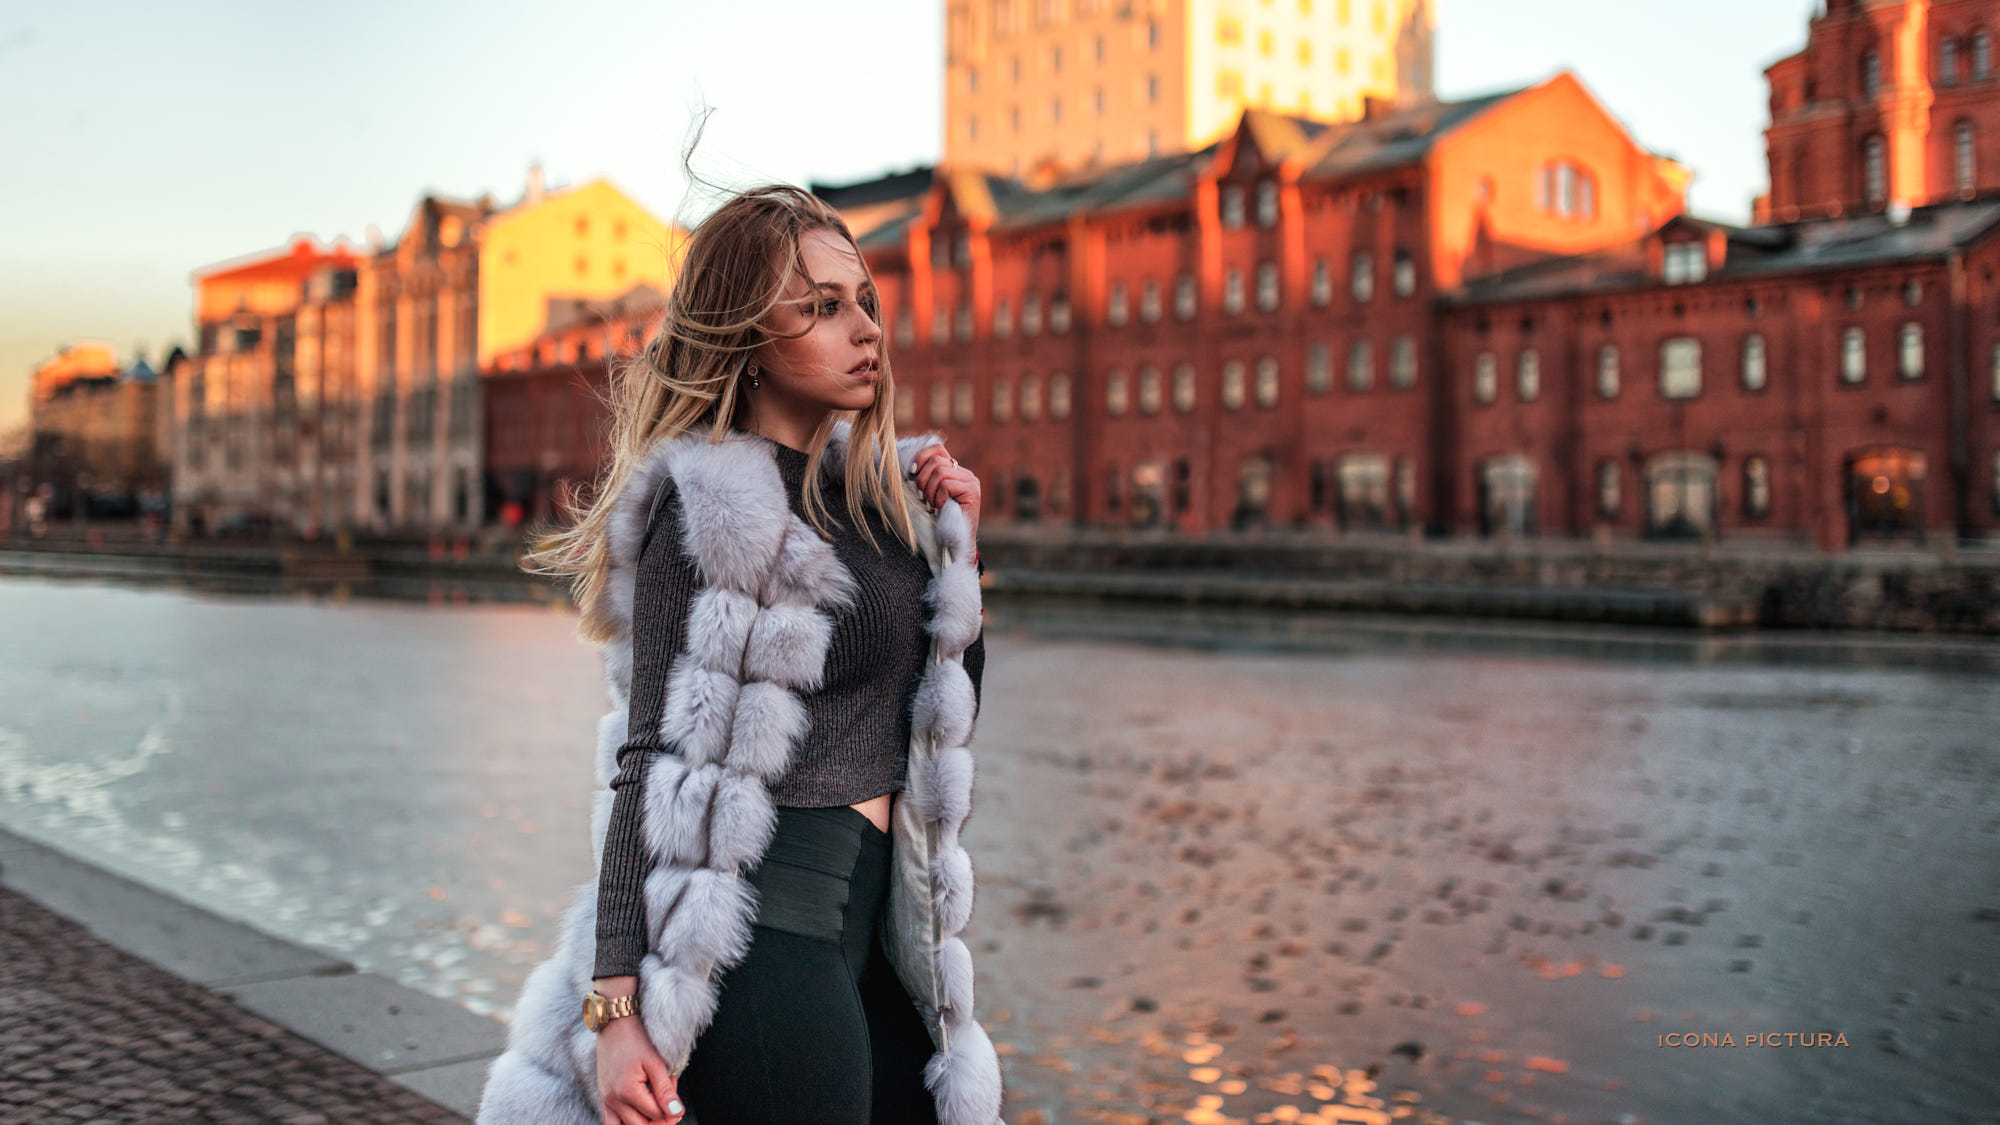 Icona Pictura Women 500px Photography Grey Sweater Riverside Windy Fur Women Outdoors Side View Publ 2000x1125